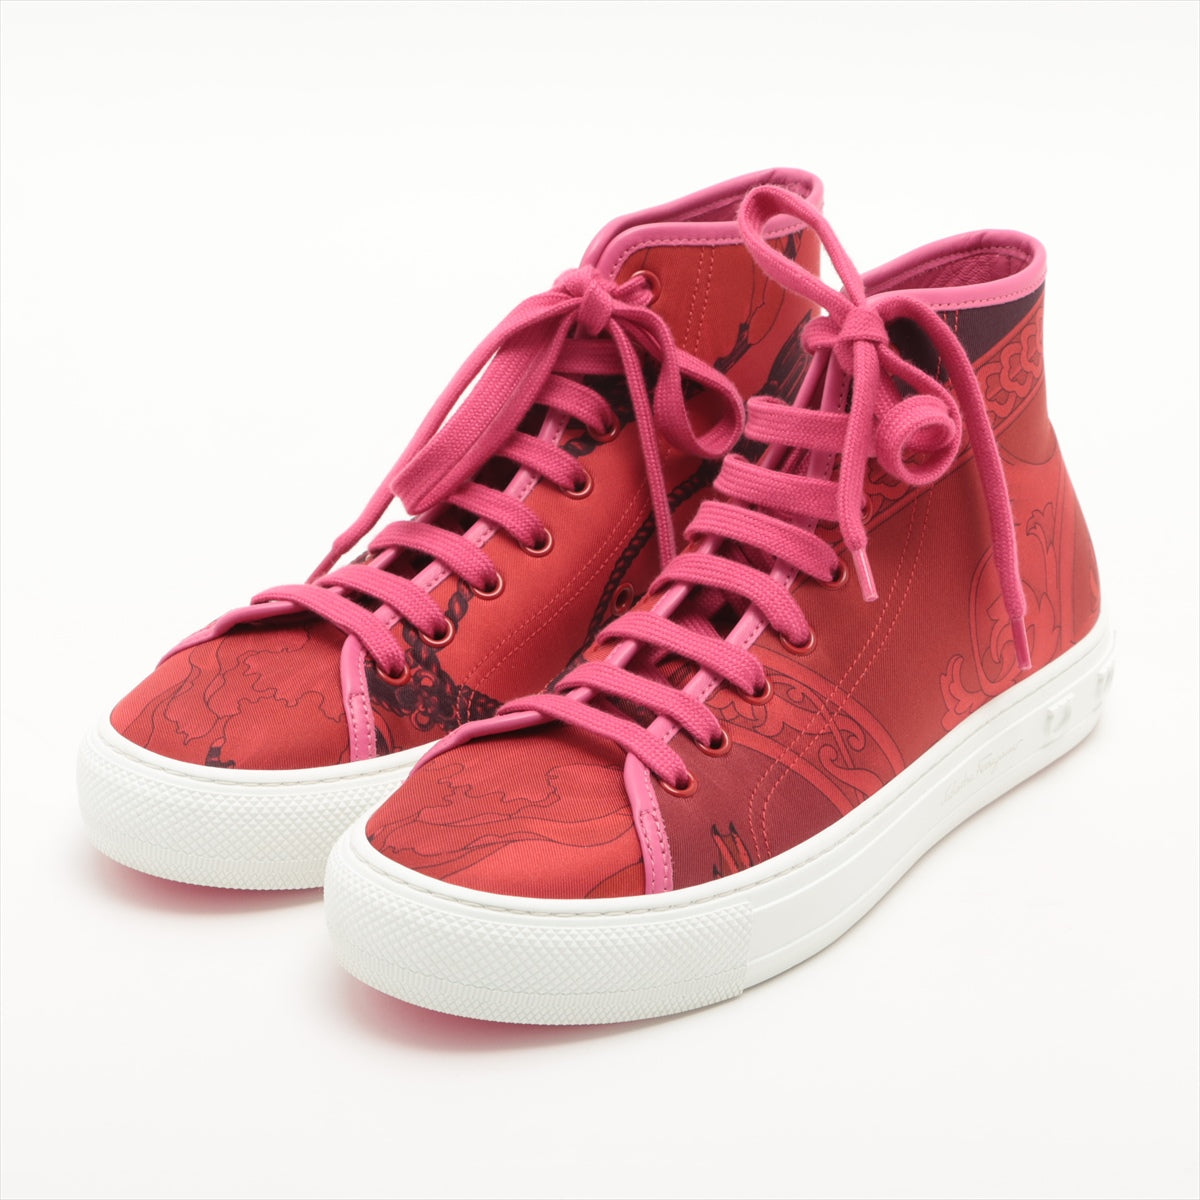 Ferragamo Leather x fabric High-top Sneakers 8C Ladies' Red MAFALDA 1 Replacement Laces Included